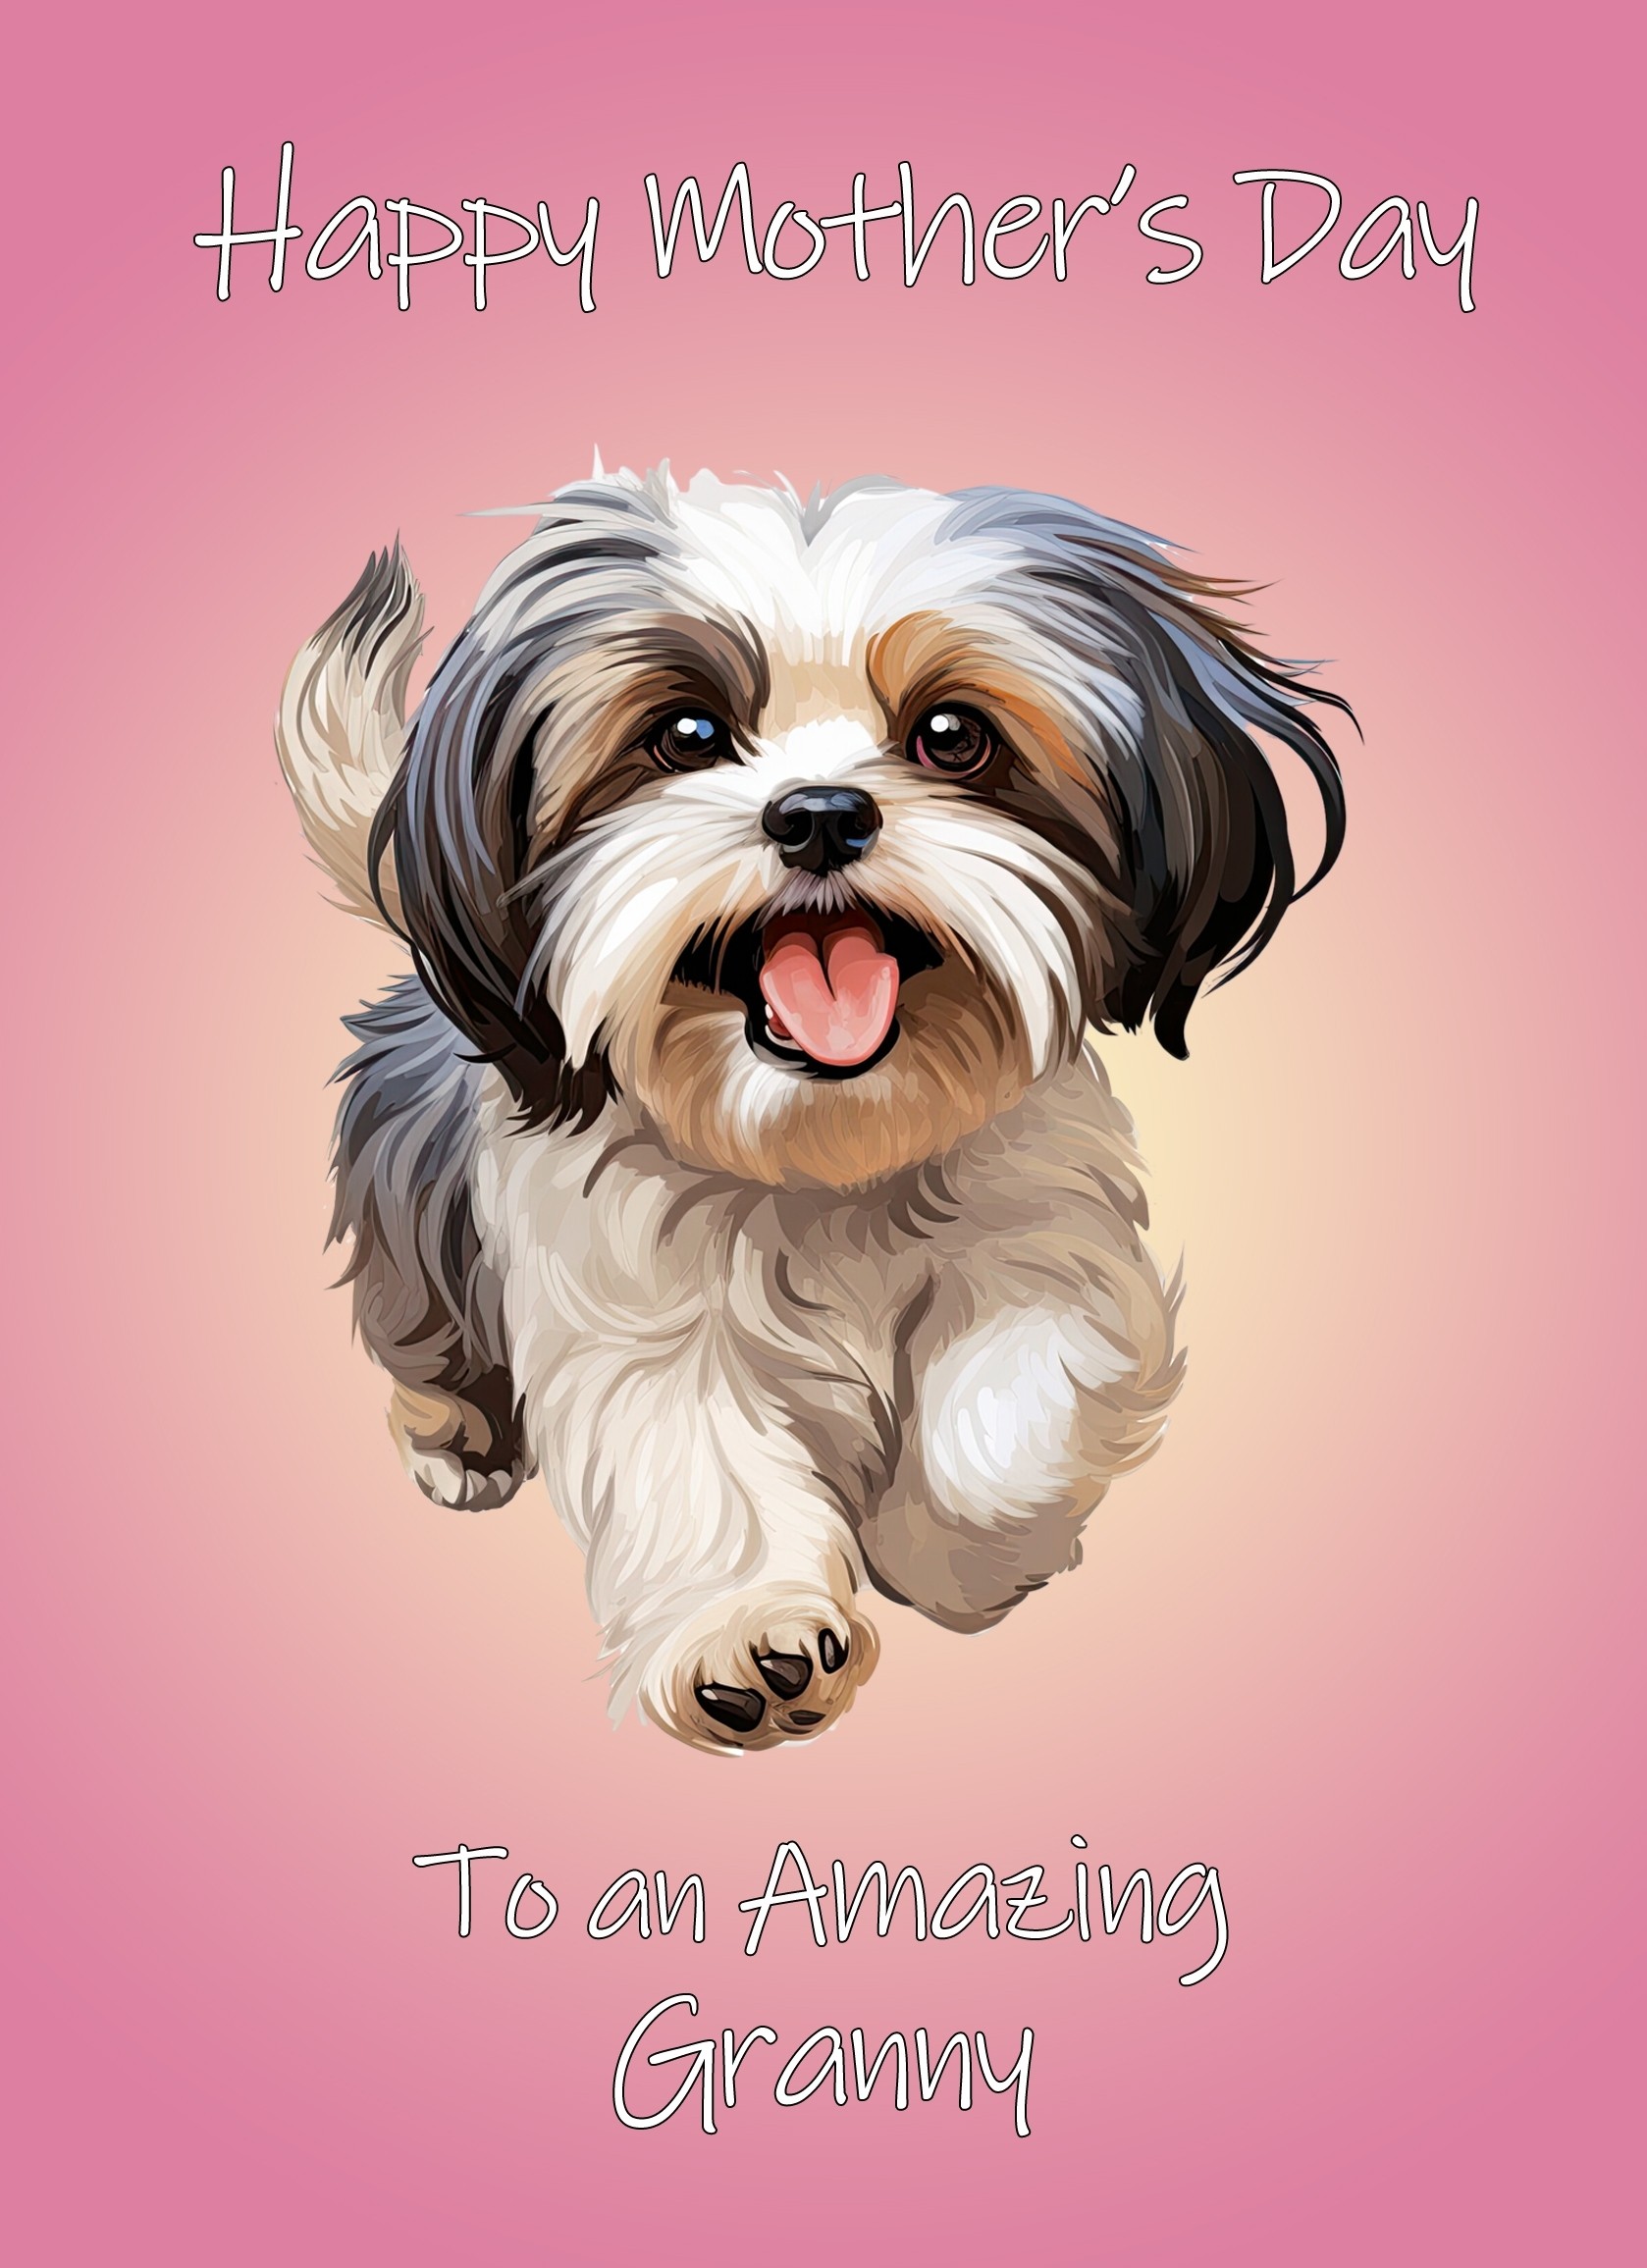 Shih Tzu Dog Mothers Day Card For Granny